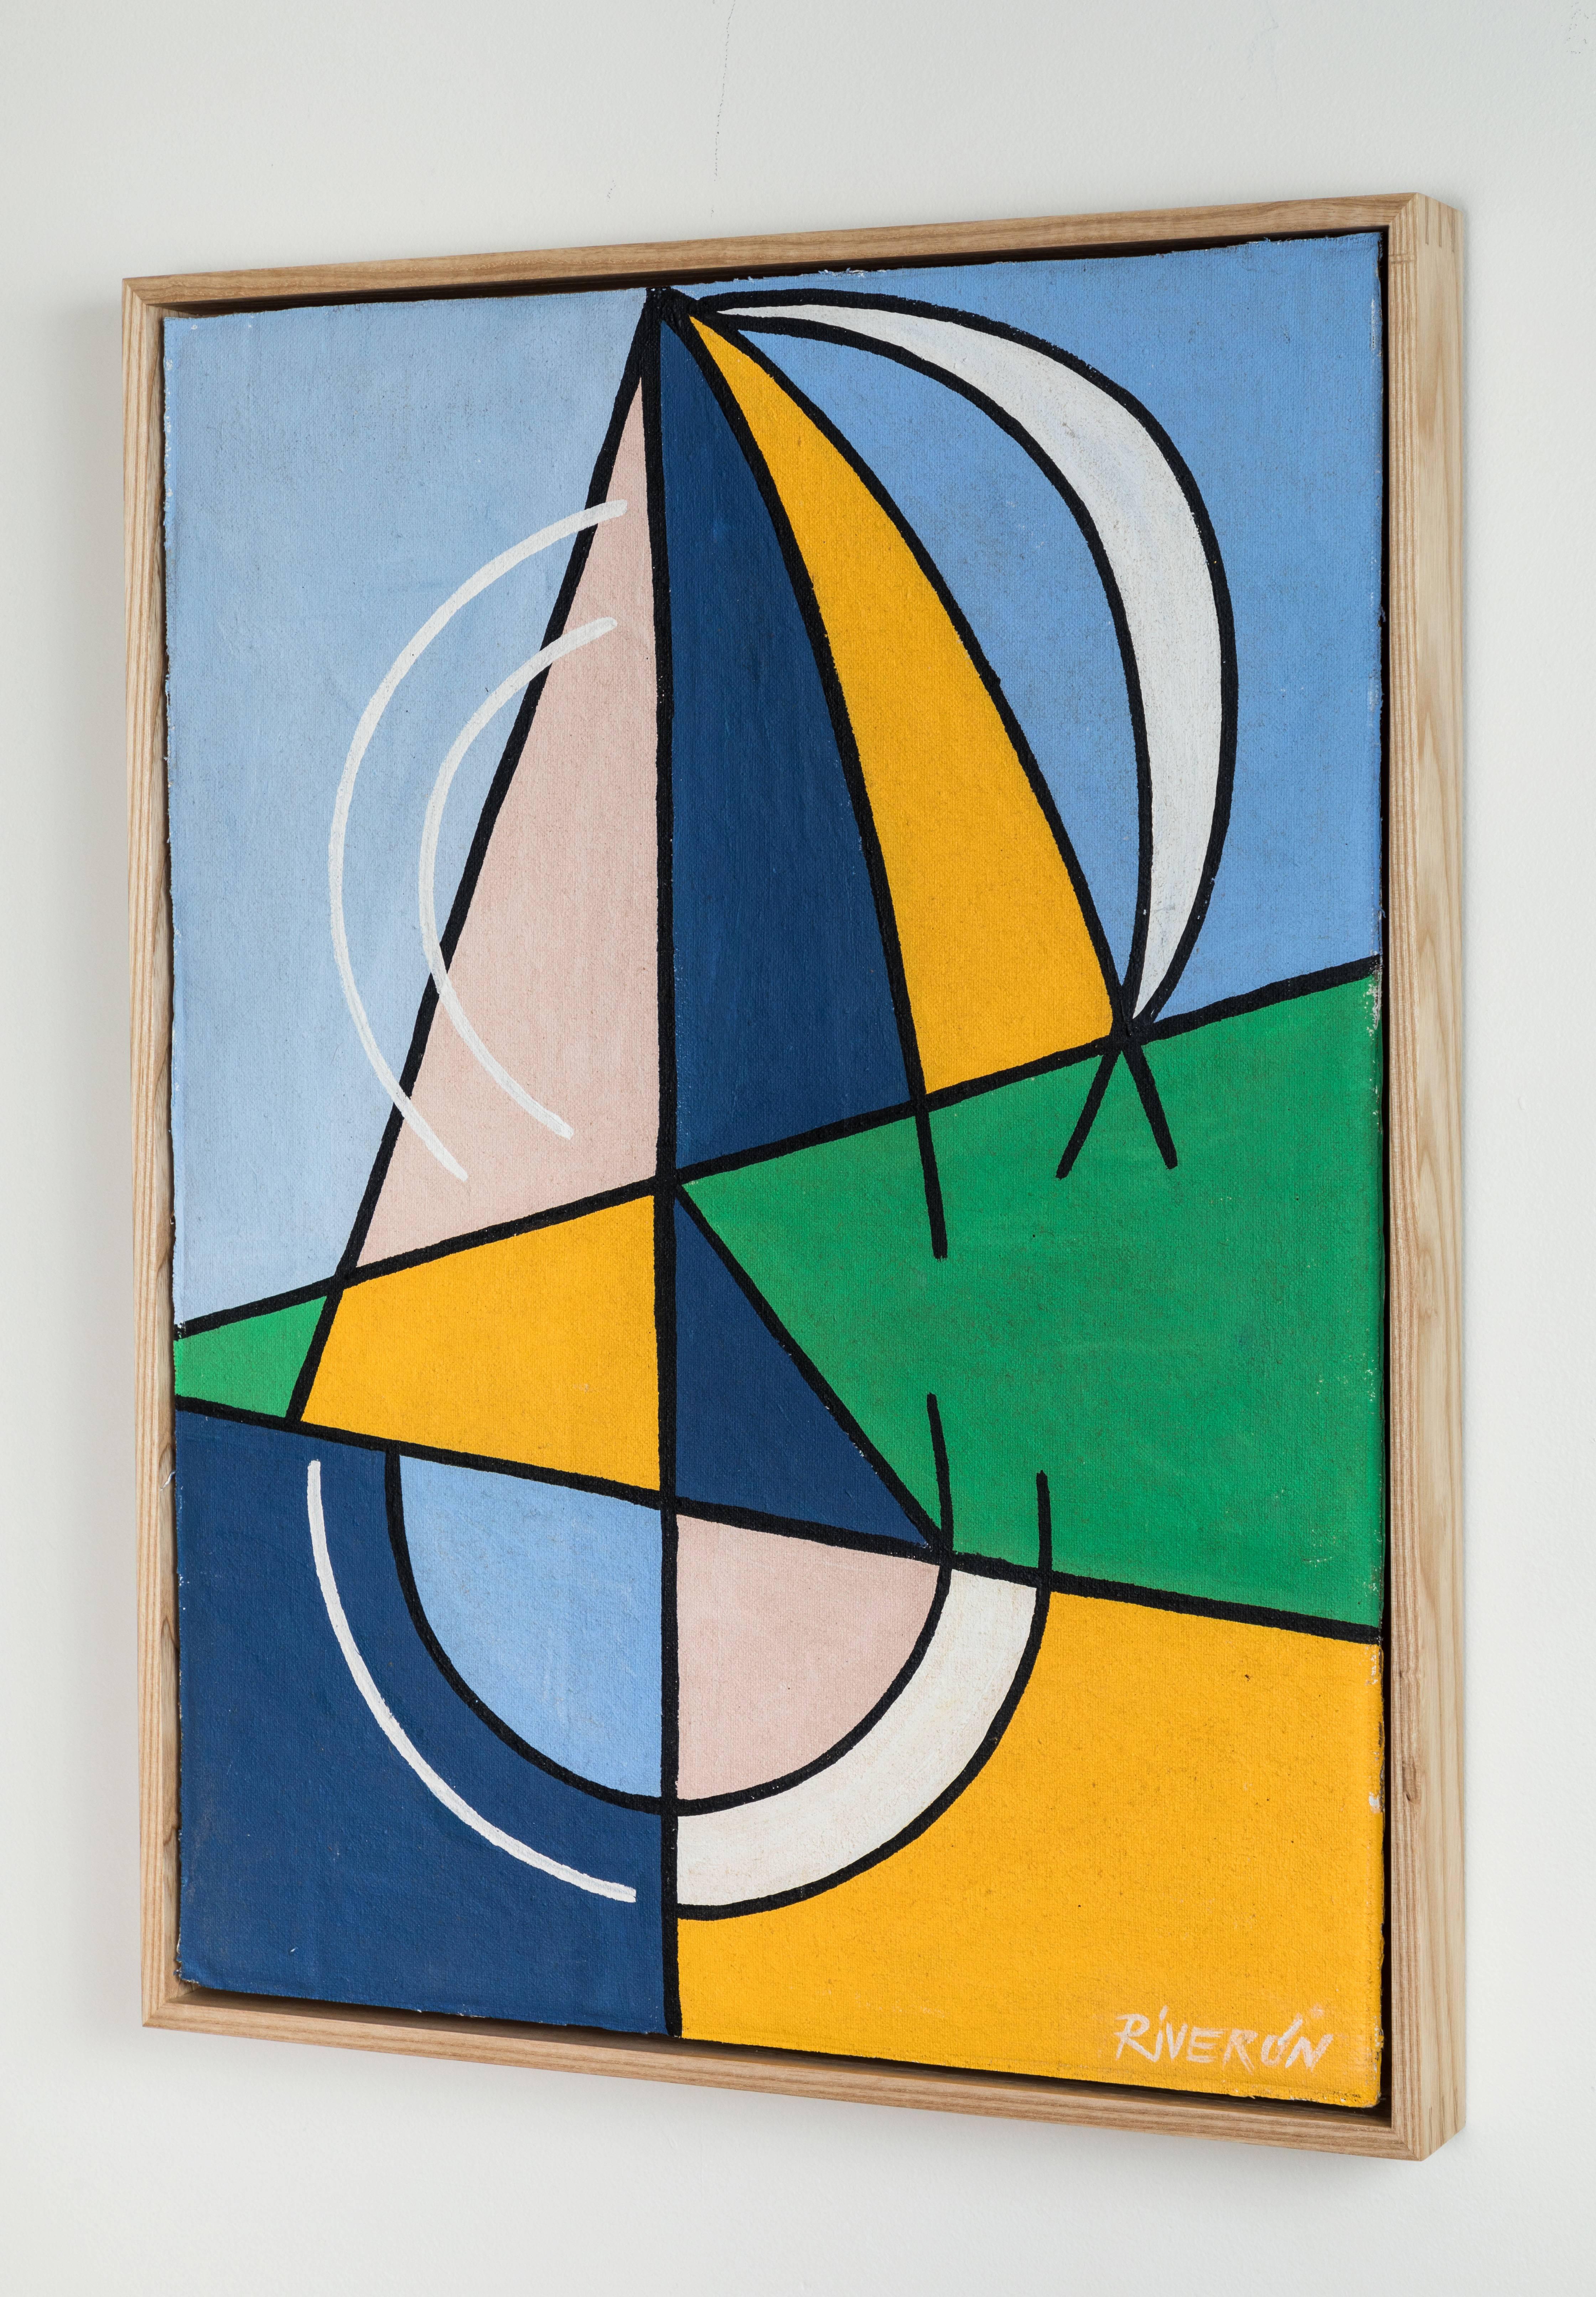 Abstract painting by Enrique Riverón (Cuban, 1902-1998). Oil on board.